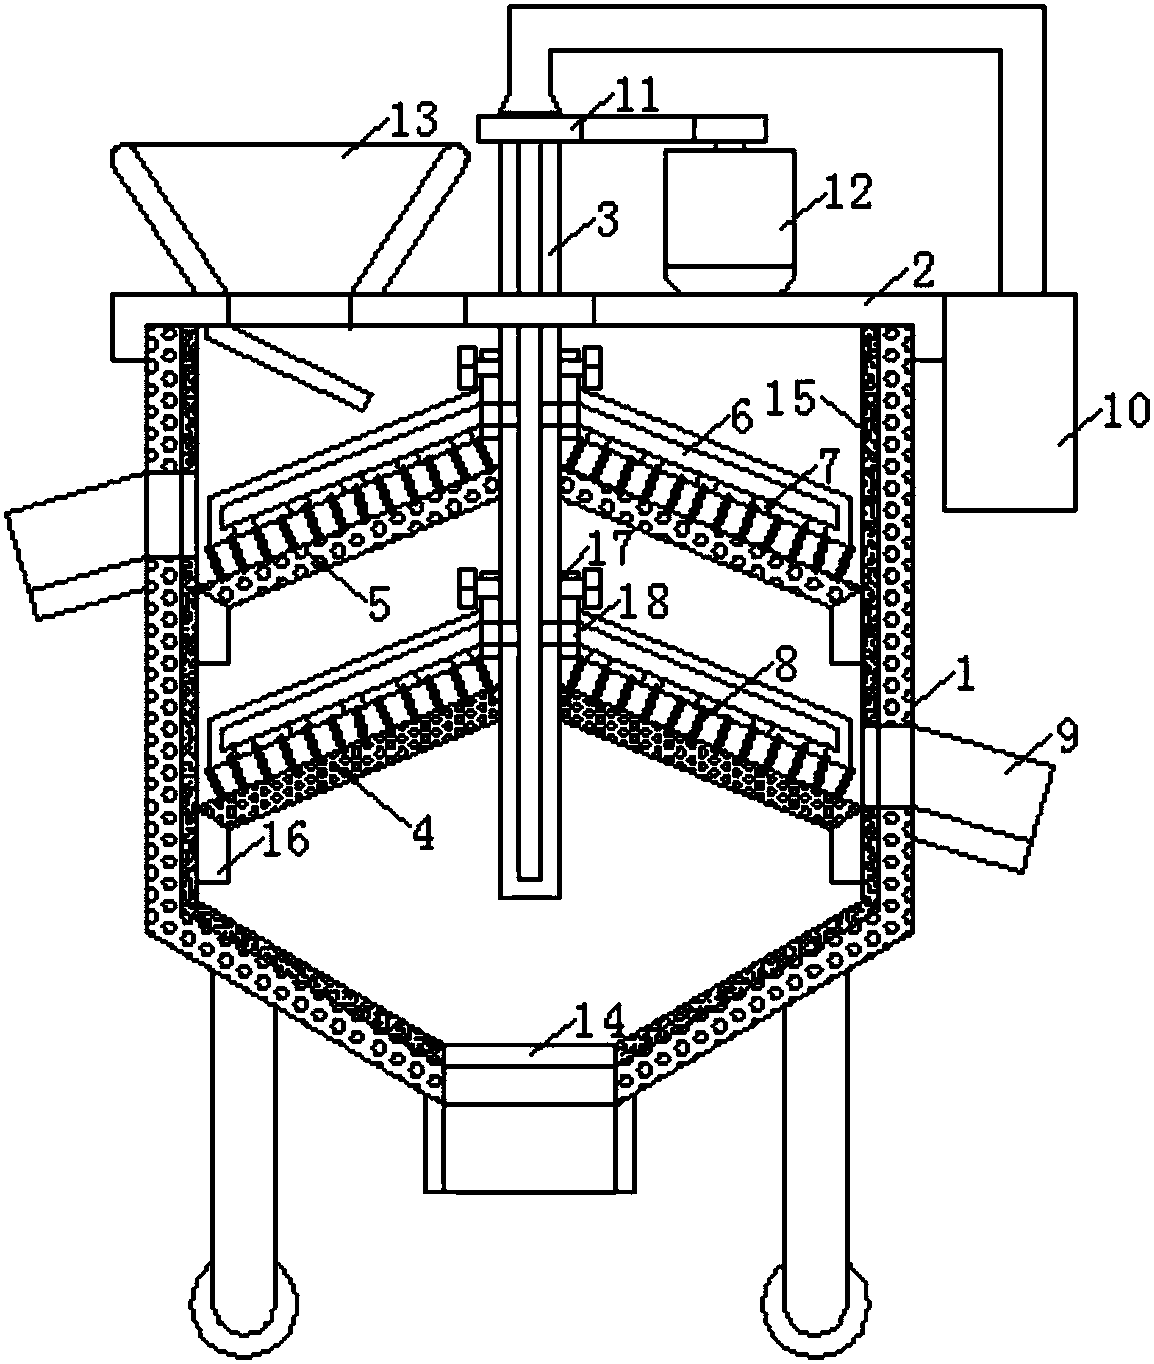 Plastic particle screening device and method